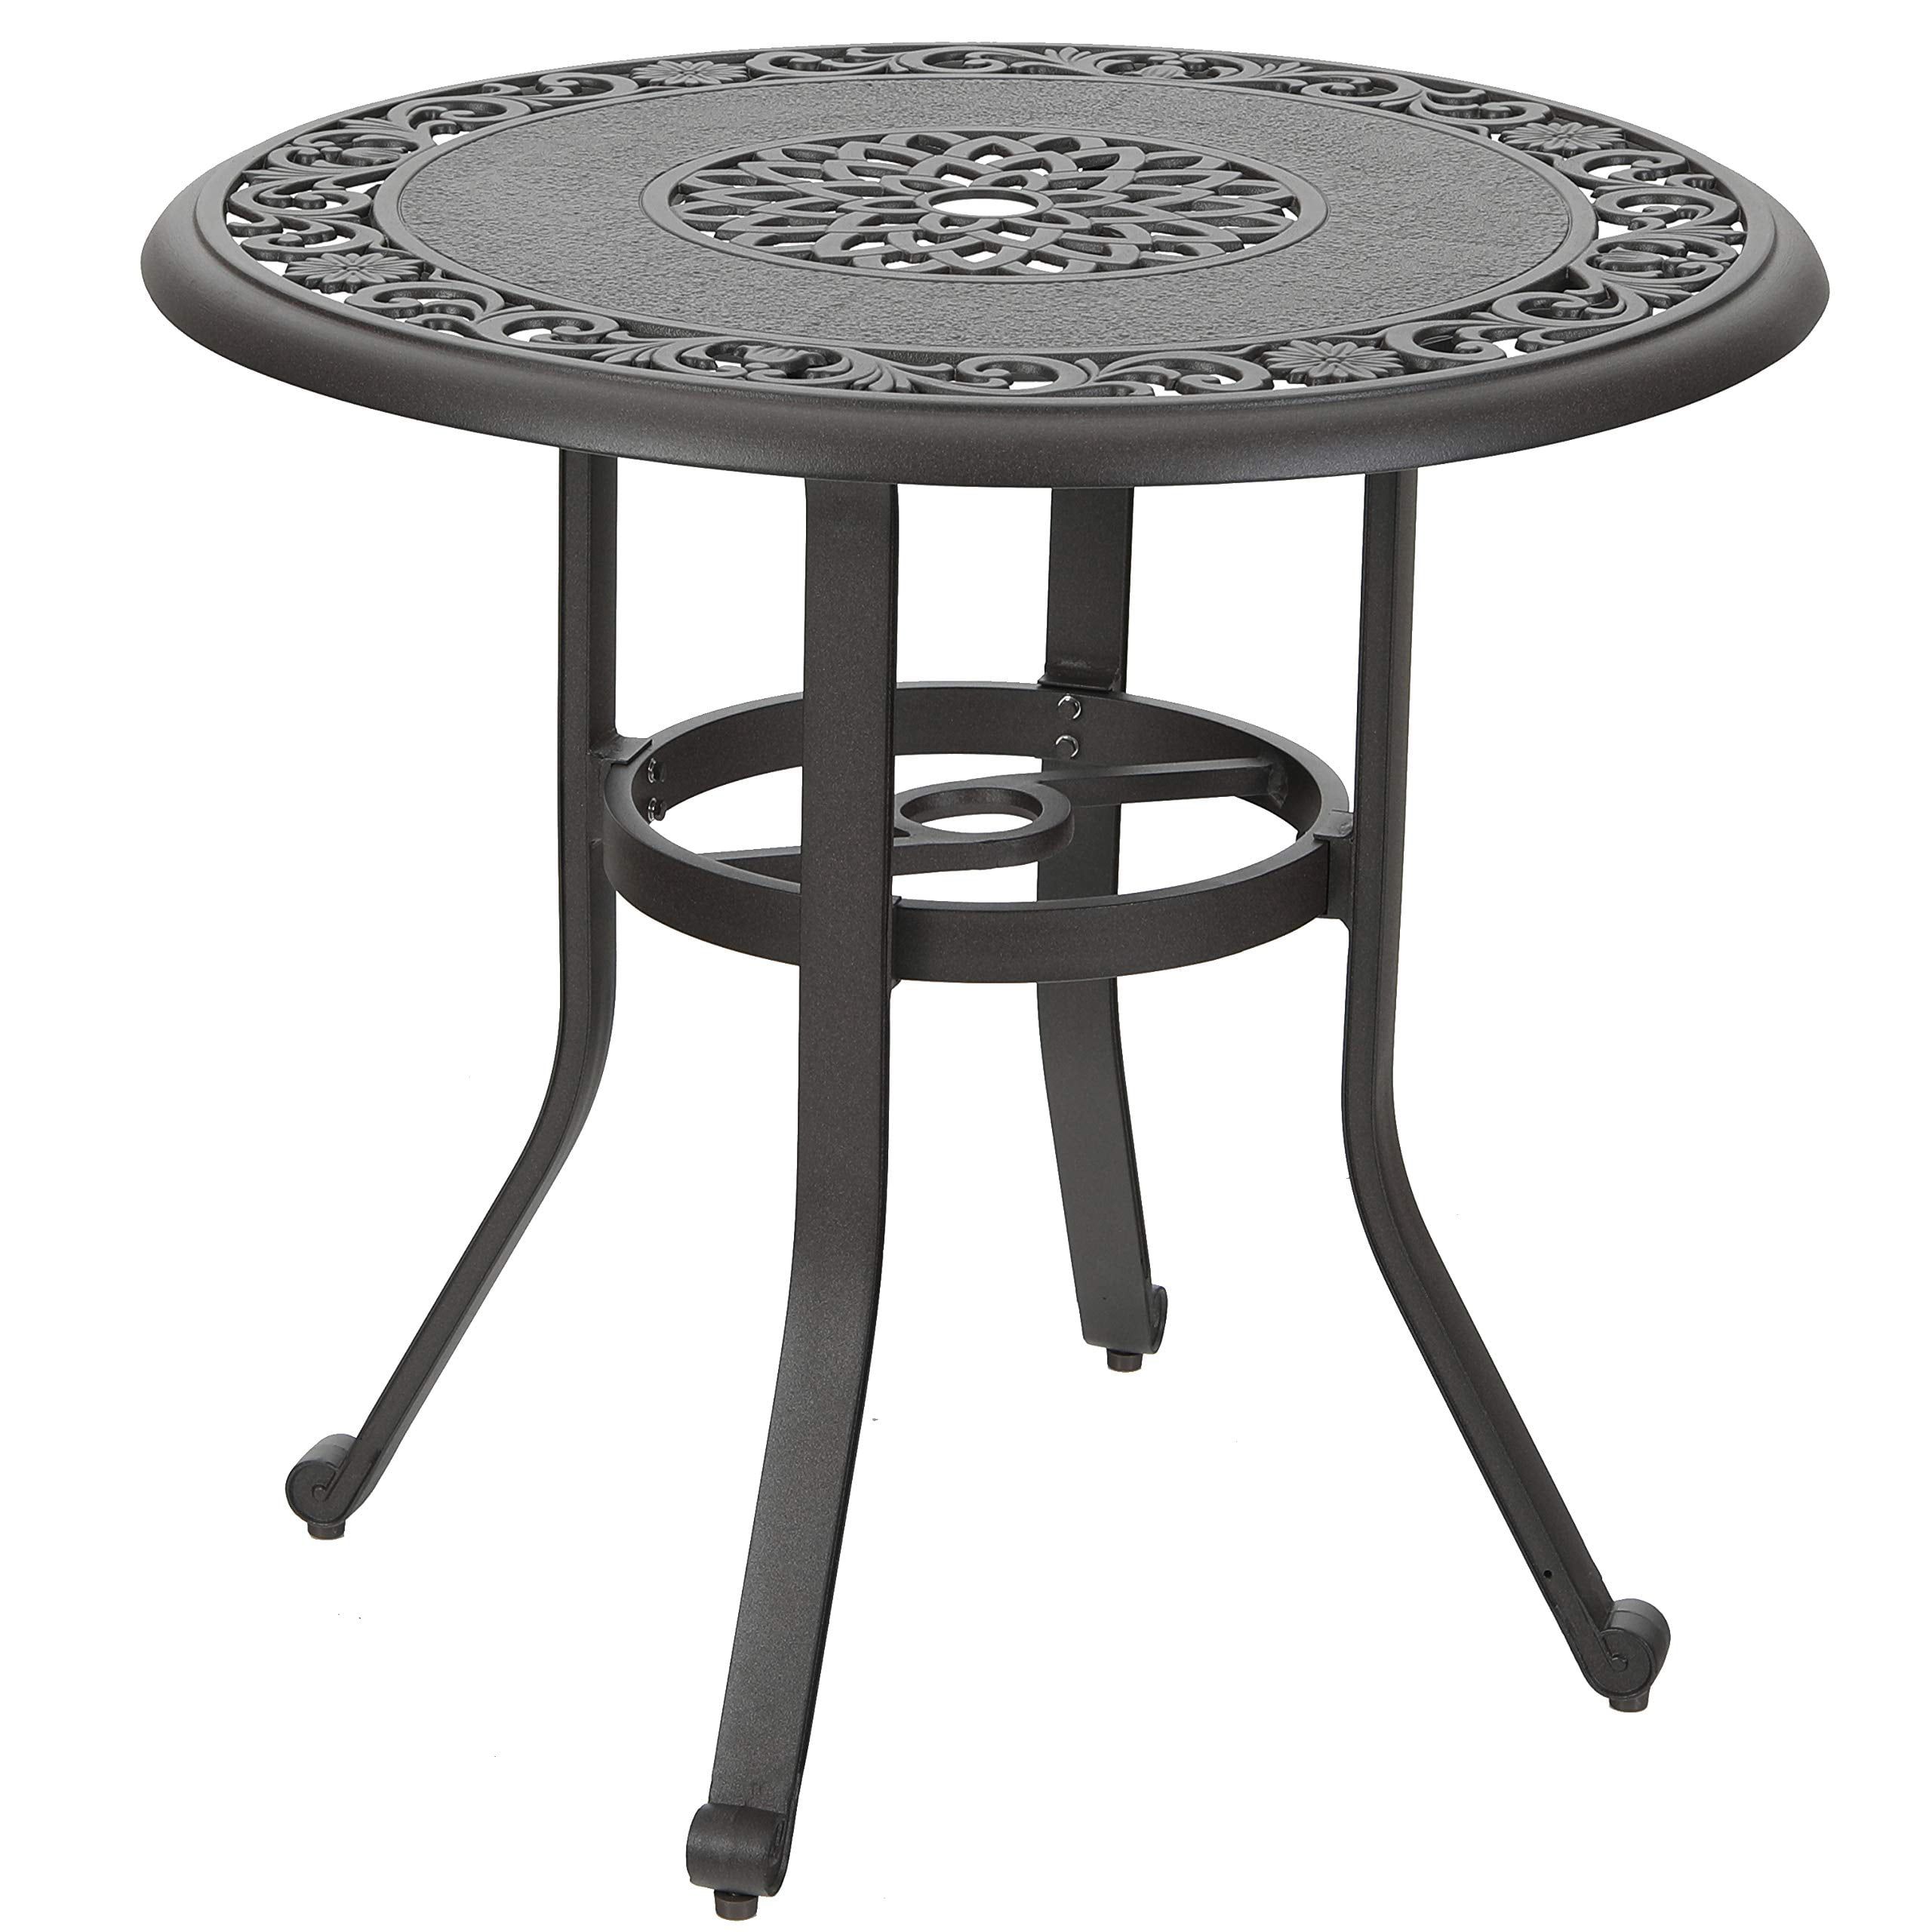 Mf Studio 32" Cast Aluminum Patio Outdoor Bistro Table, Round Dining Within Round Steel Patio Coffee Tables (View 6 of 20)